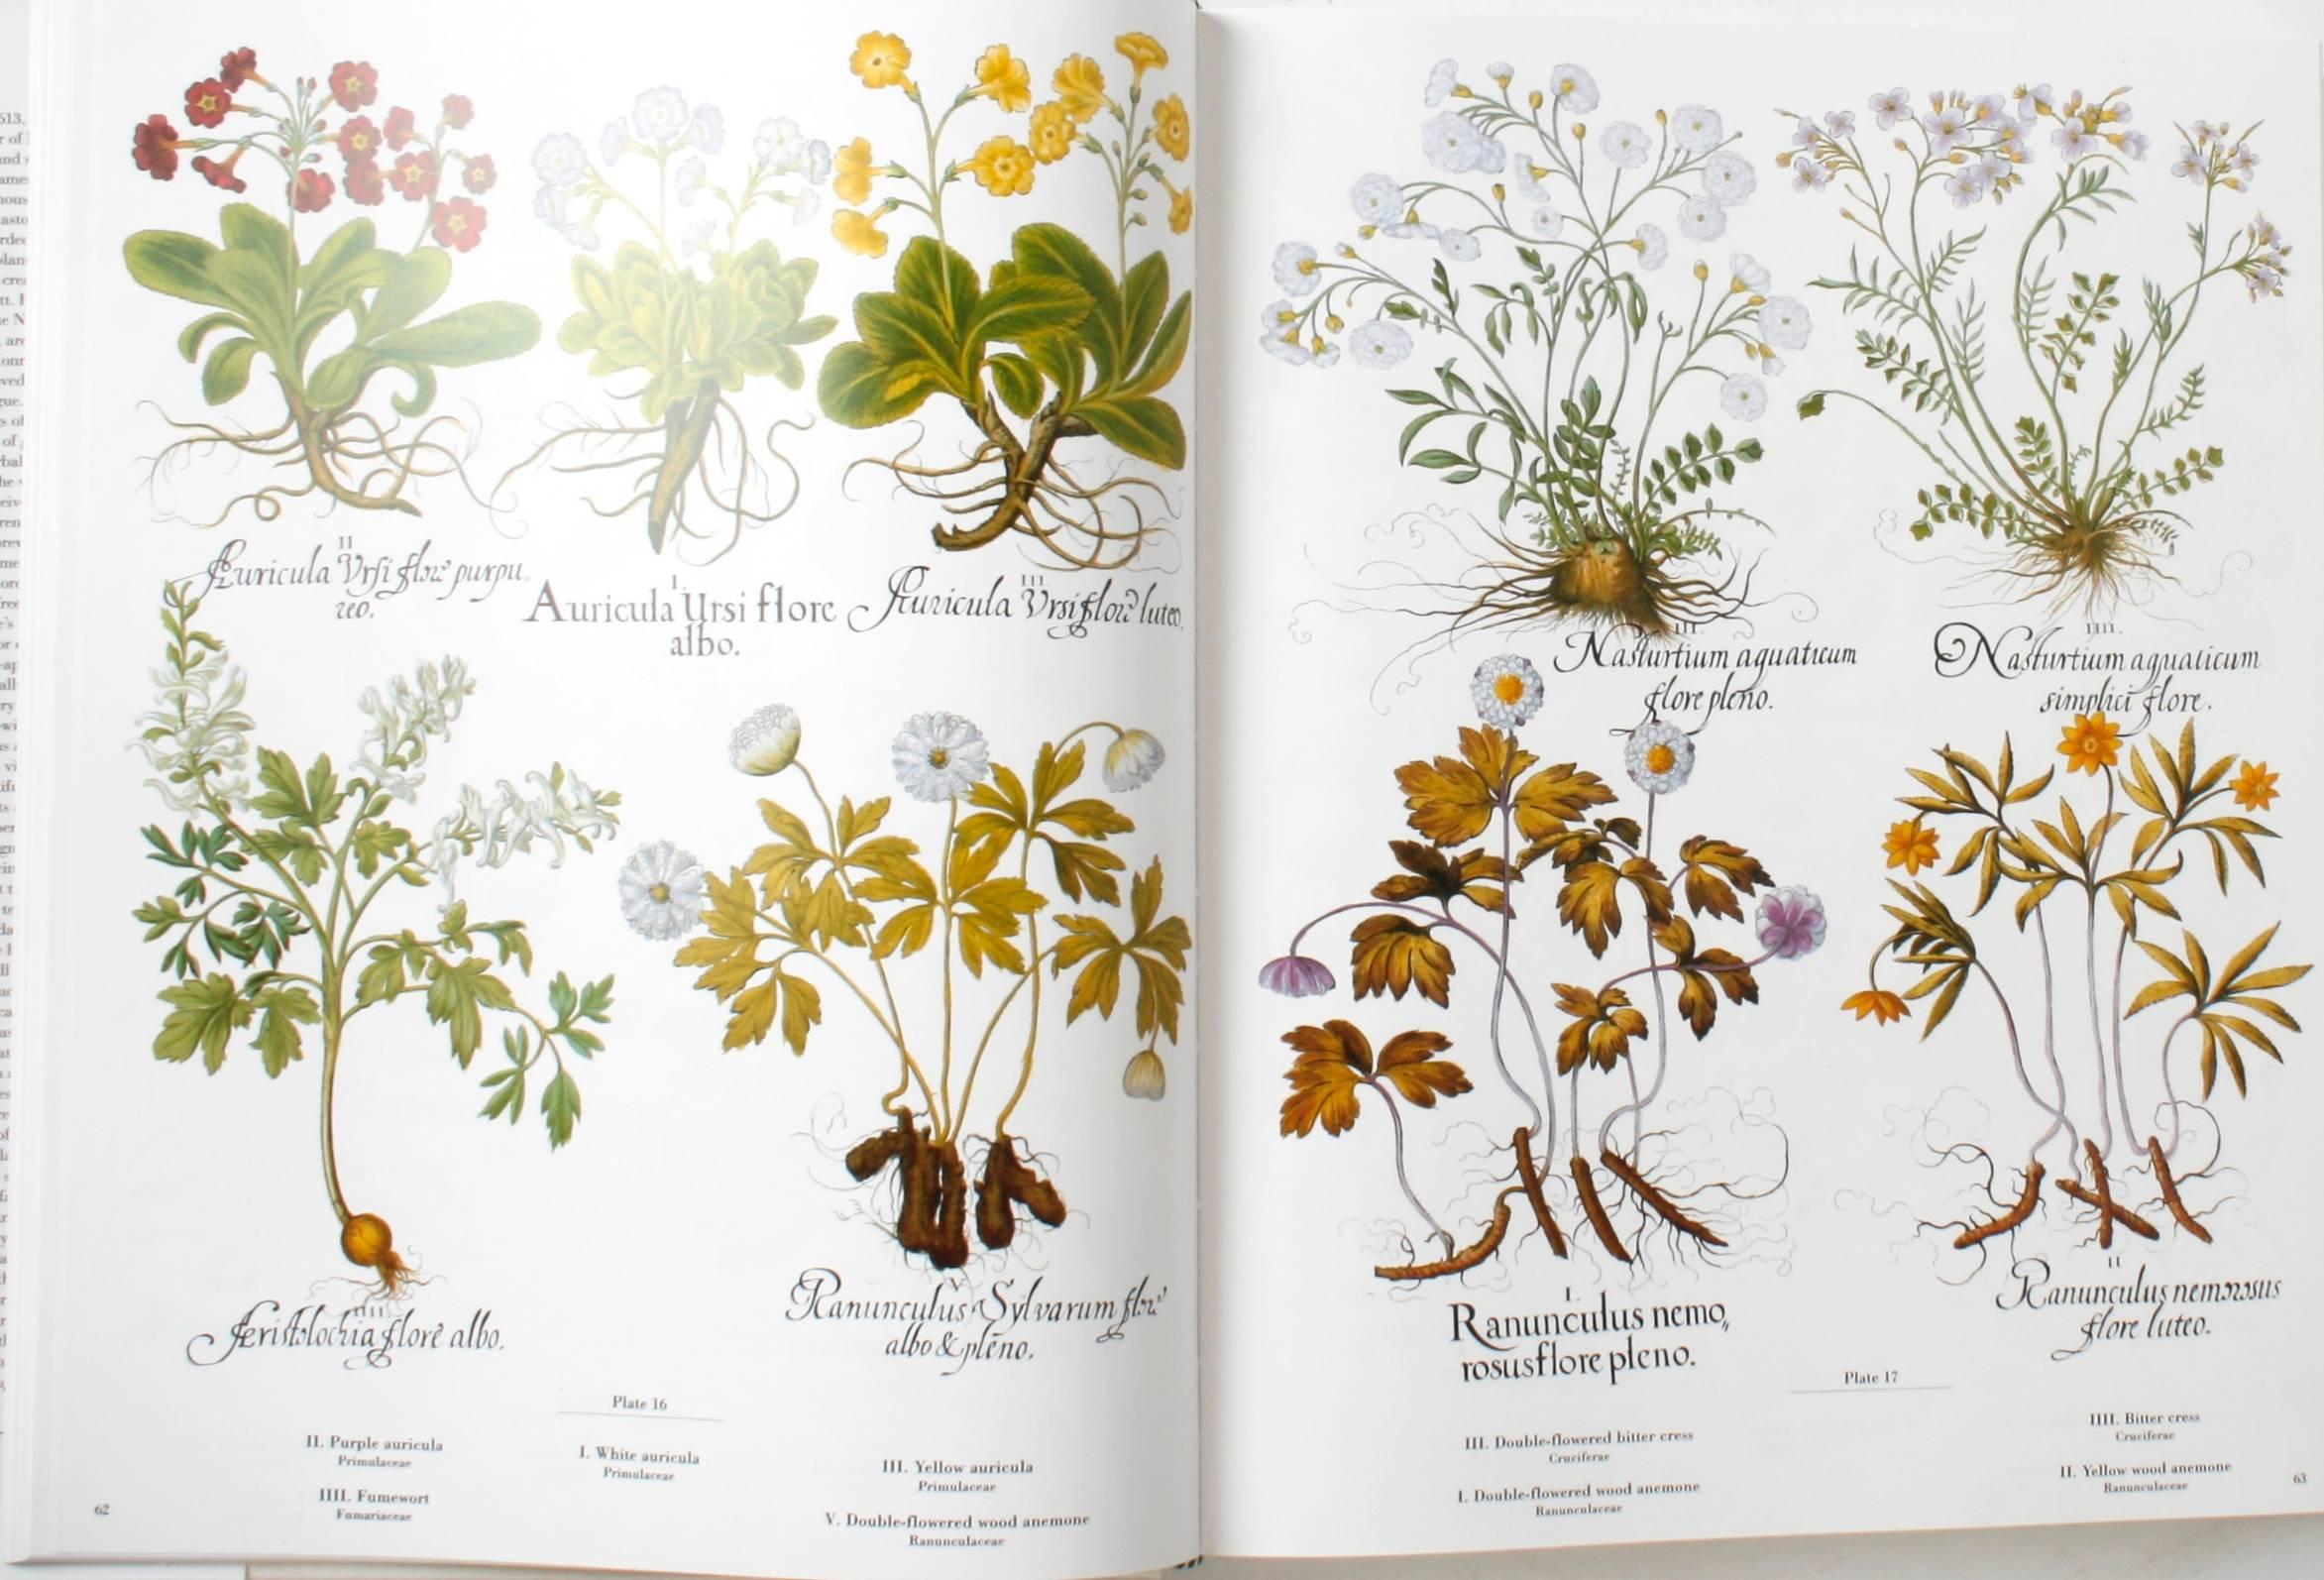 The Besler Florilegium: Plants of the Four Seasons by Gerard G. Aymonin, Eileen Finletter (Translator) and, Jean Ayer (Translator). Harry N. Abrams, NY, 1989. 1st Ed thus hardcover with dust jacket and hardcase. This is a facsimile of Besler's